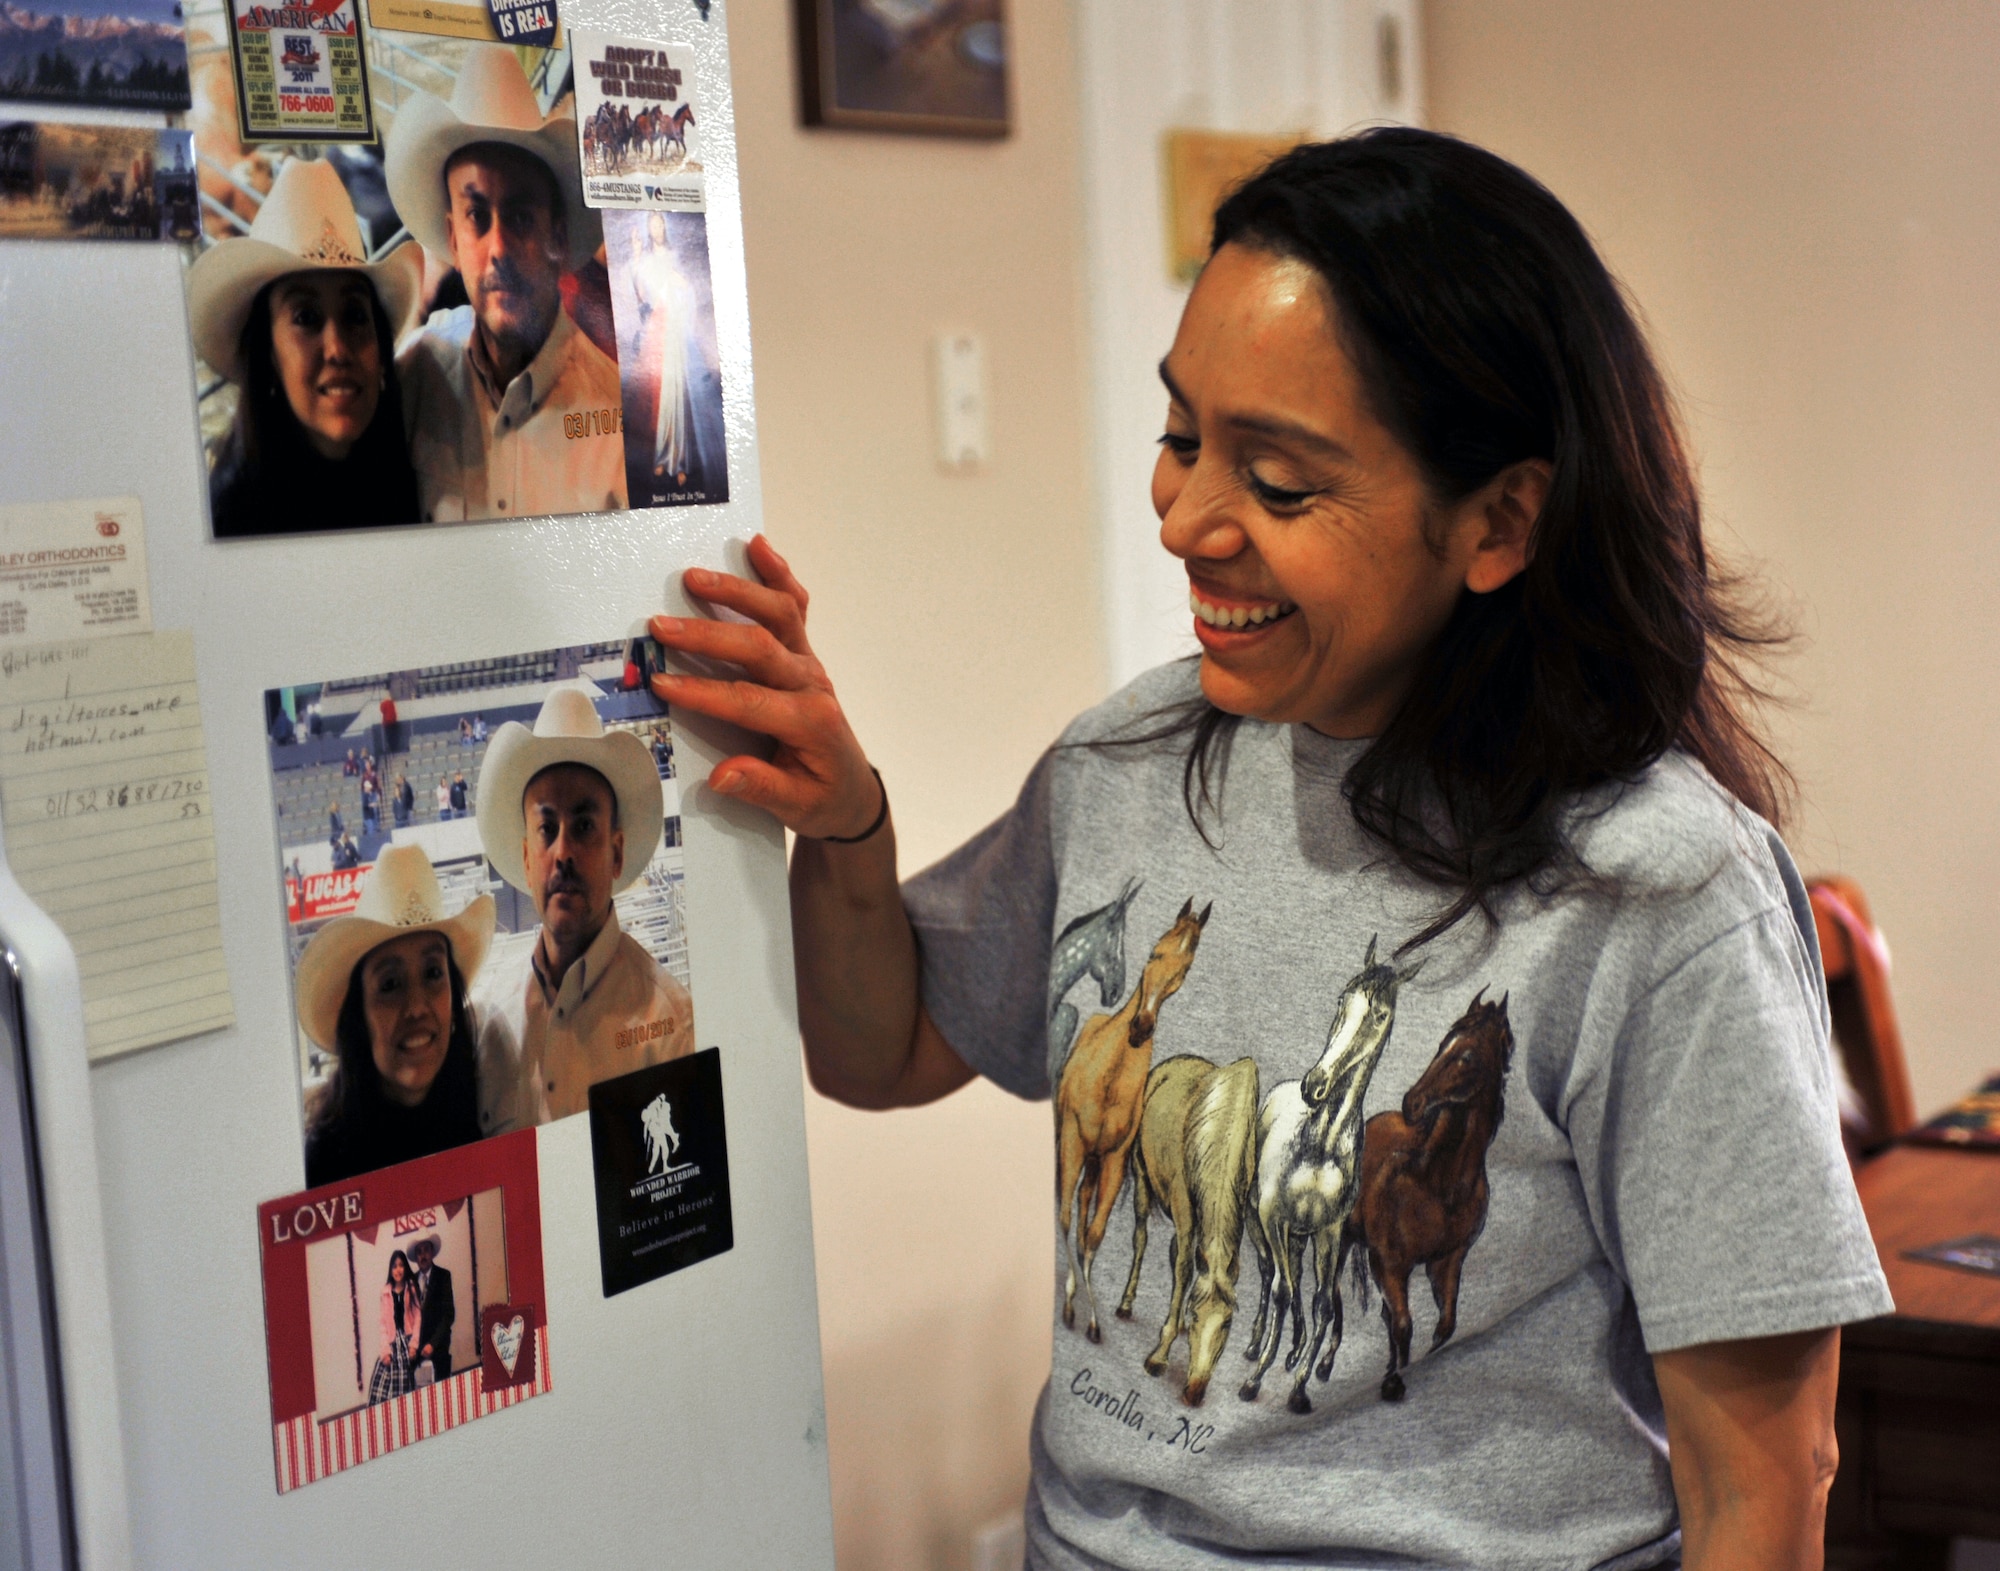 Beatriz Castillo, a software programmer at the NASA Langley Research Center in Hampton, Va., smiles as she looks at photos of her husband, Chief Master Sgt. Guillermo Castillo, Air Combat Command Inspector General superintendent of the maintenance division, at her home in Yorktown, Va, Jan. 30, 2013.  Mrs. Castillo's husband is currently deployed, and she says one of their favorite things to do together when he is home is to go to rodeos. (U.S. Air Force photo by Staff Sgt. Katie Gar Ward/Released)
